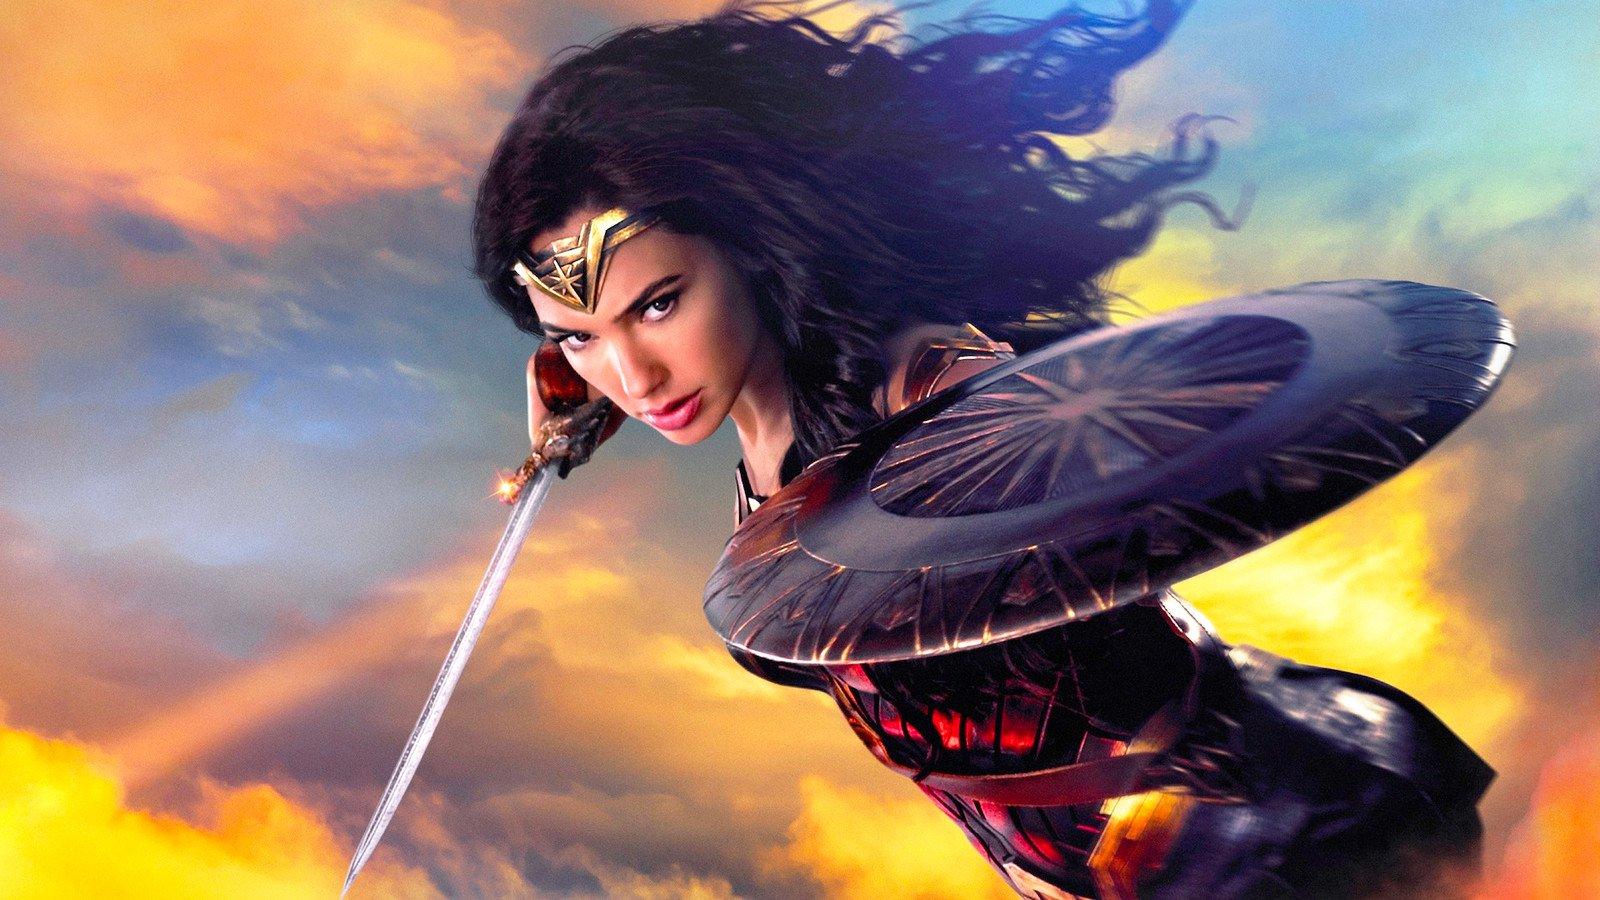 Leaked 'Wonder Woman 1984' set footage suggests introduction